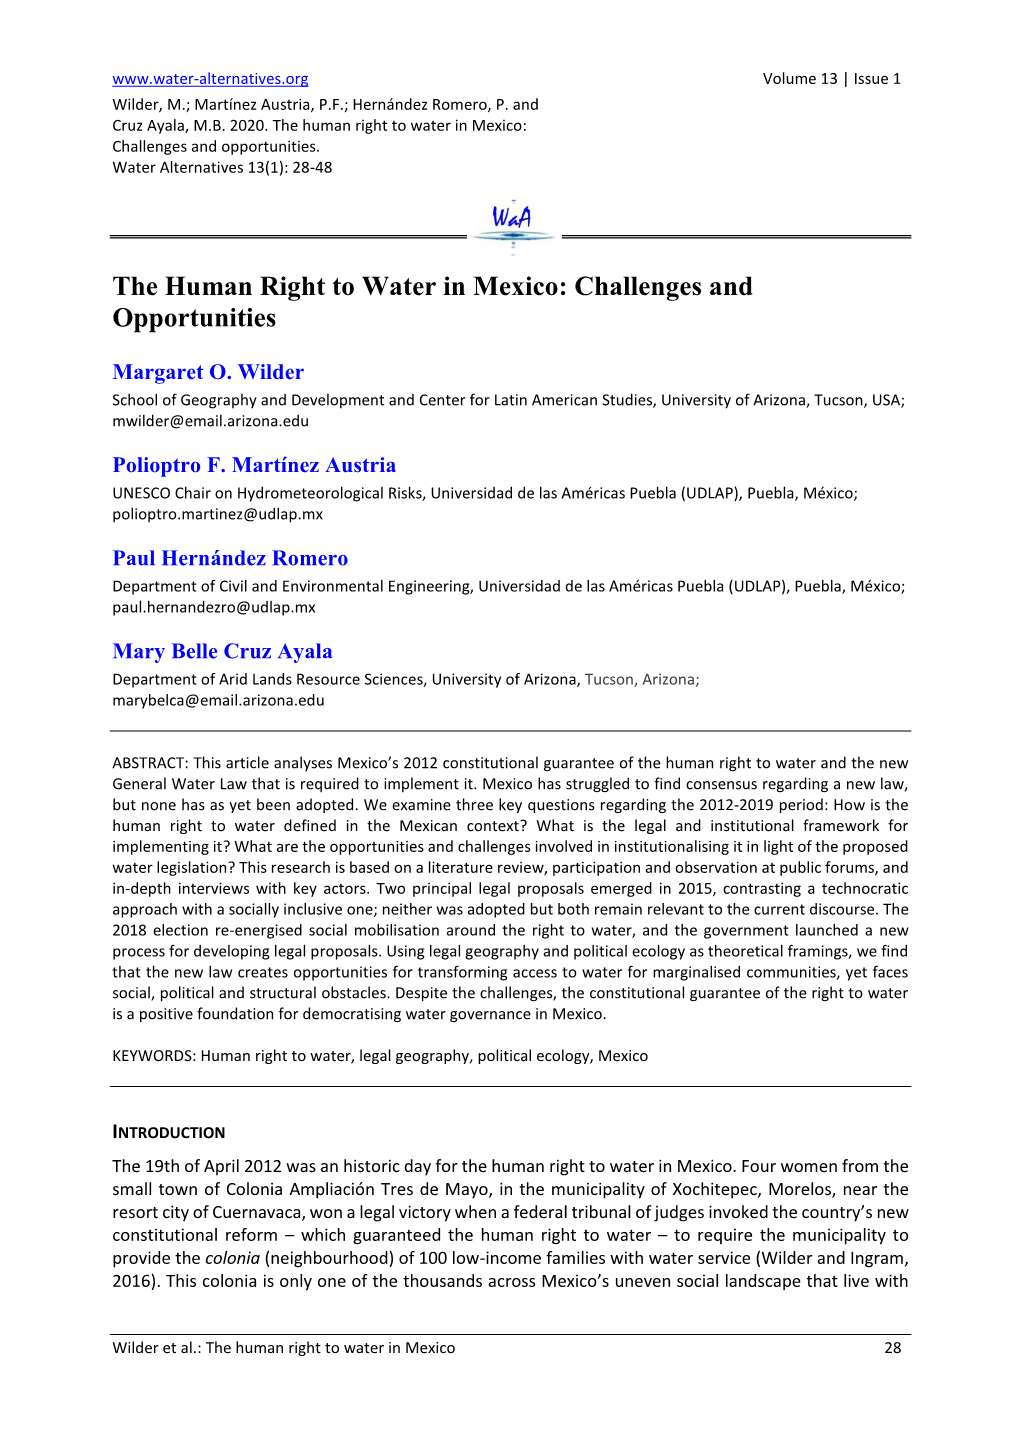 The Human Right to Water in Mexico: Challenges and Opportunities